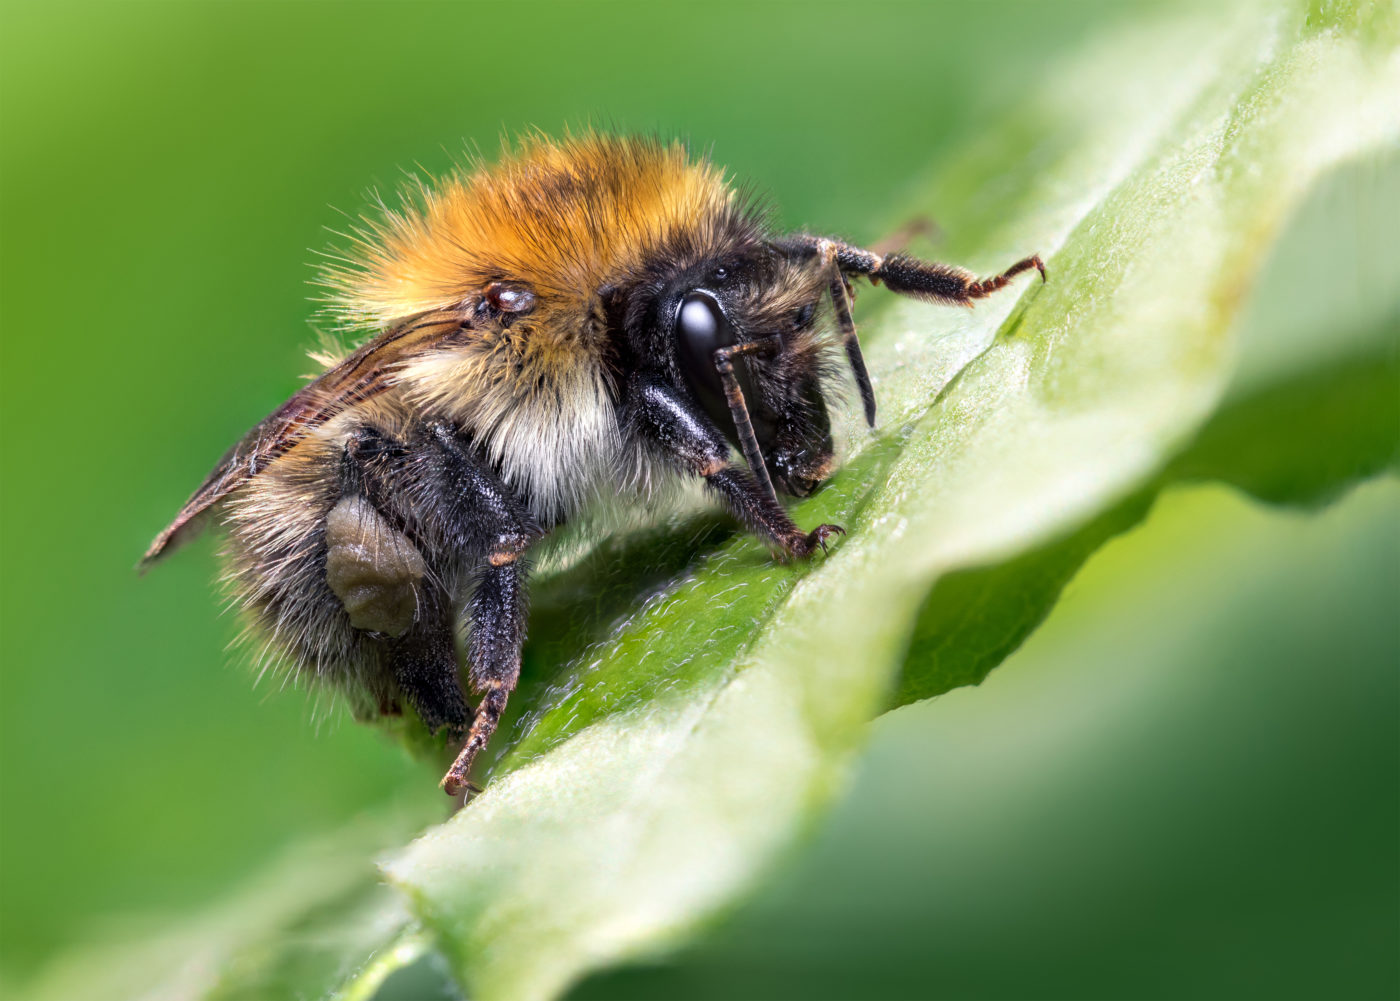 Carder bee, Bombus pascuorum on a green leaf